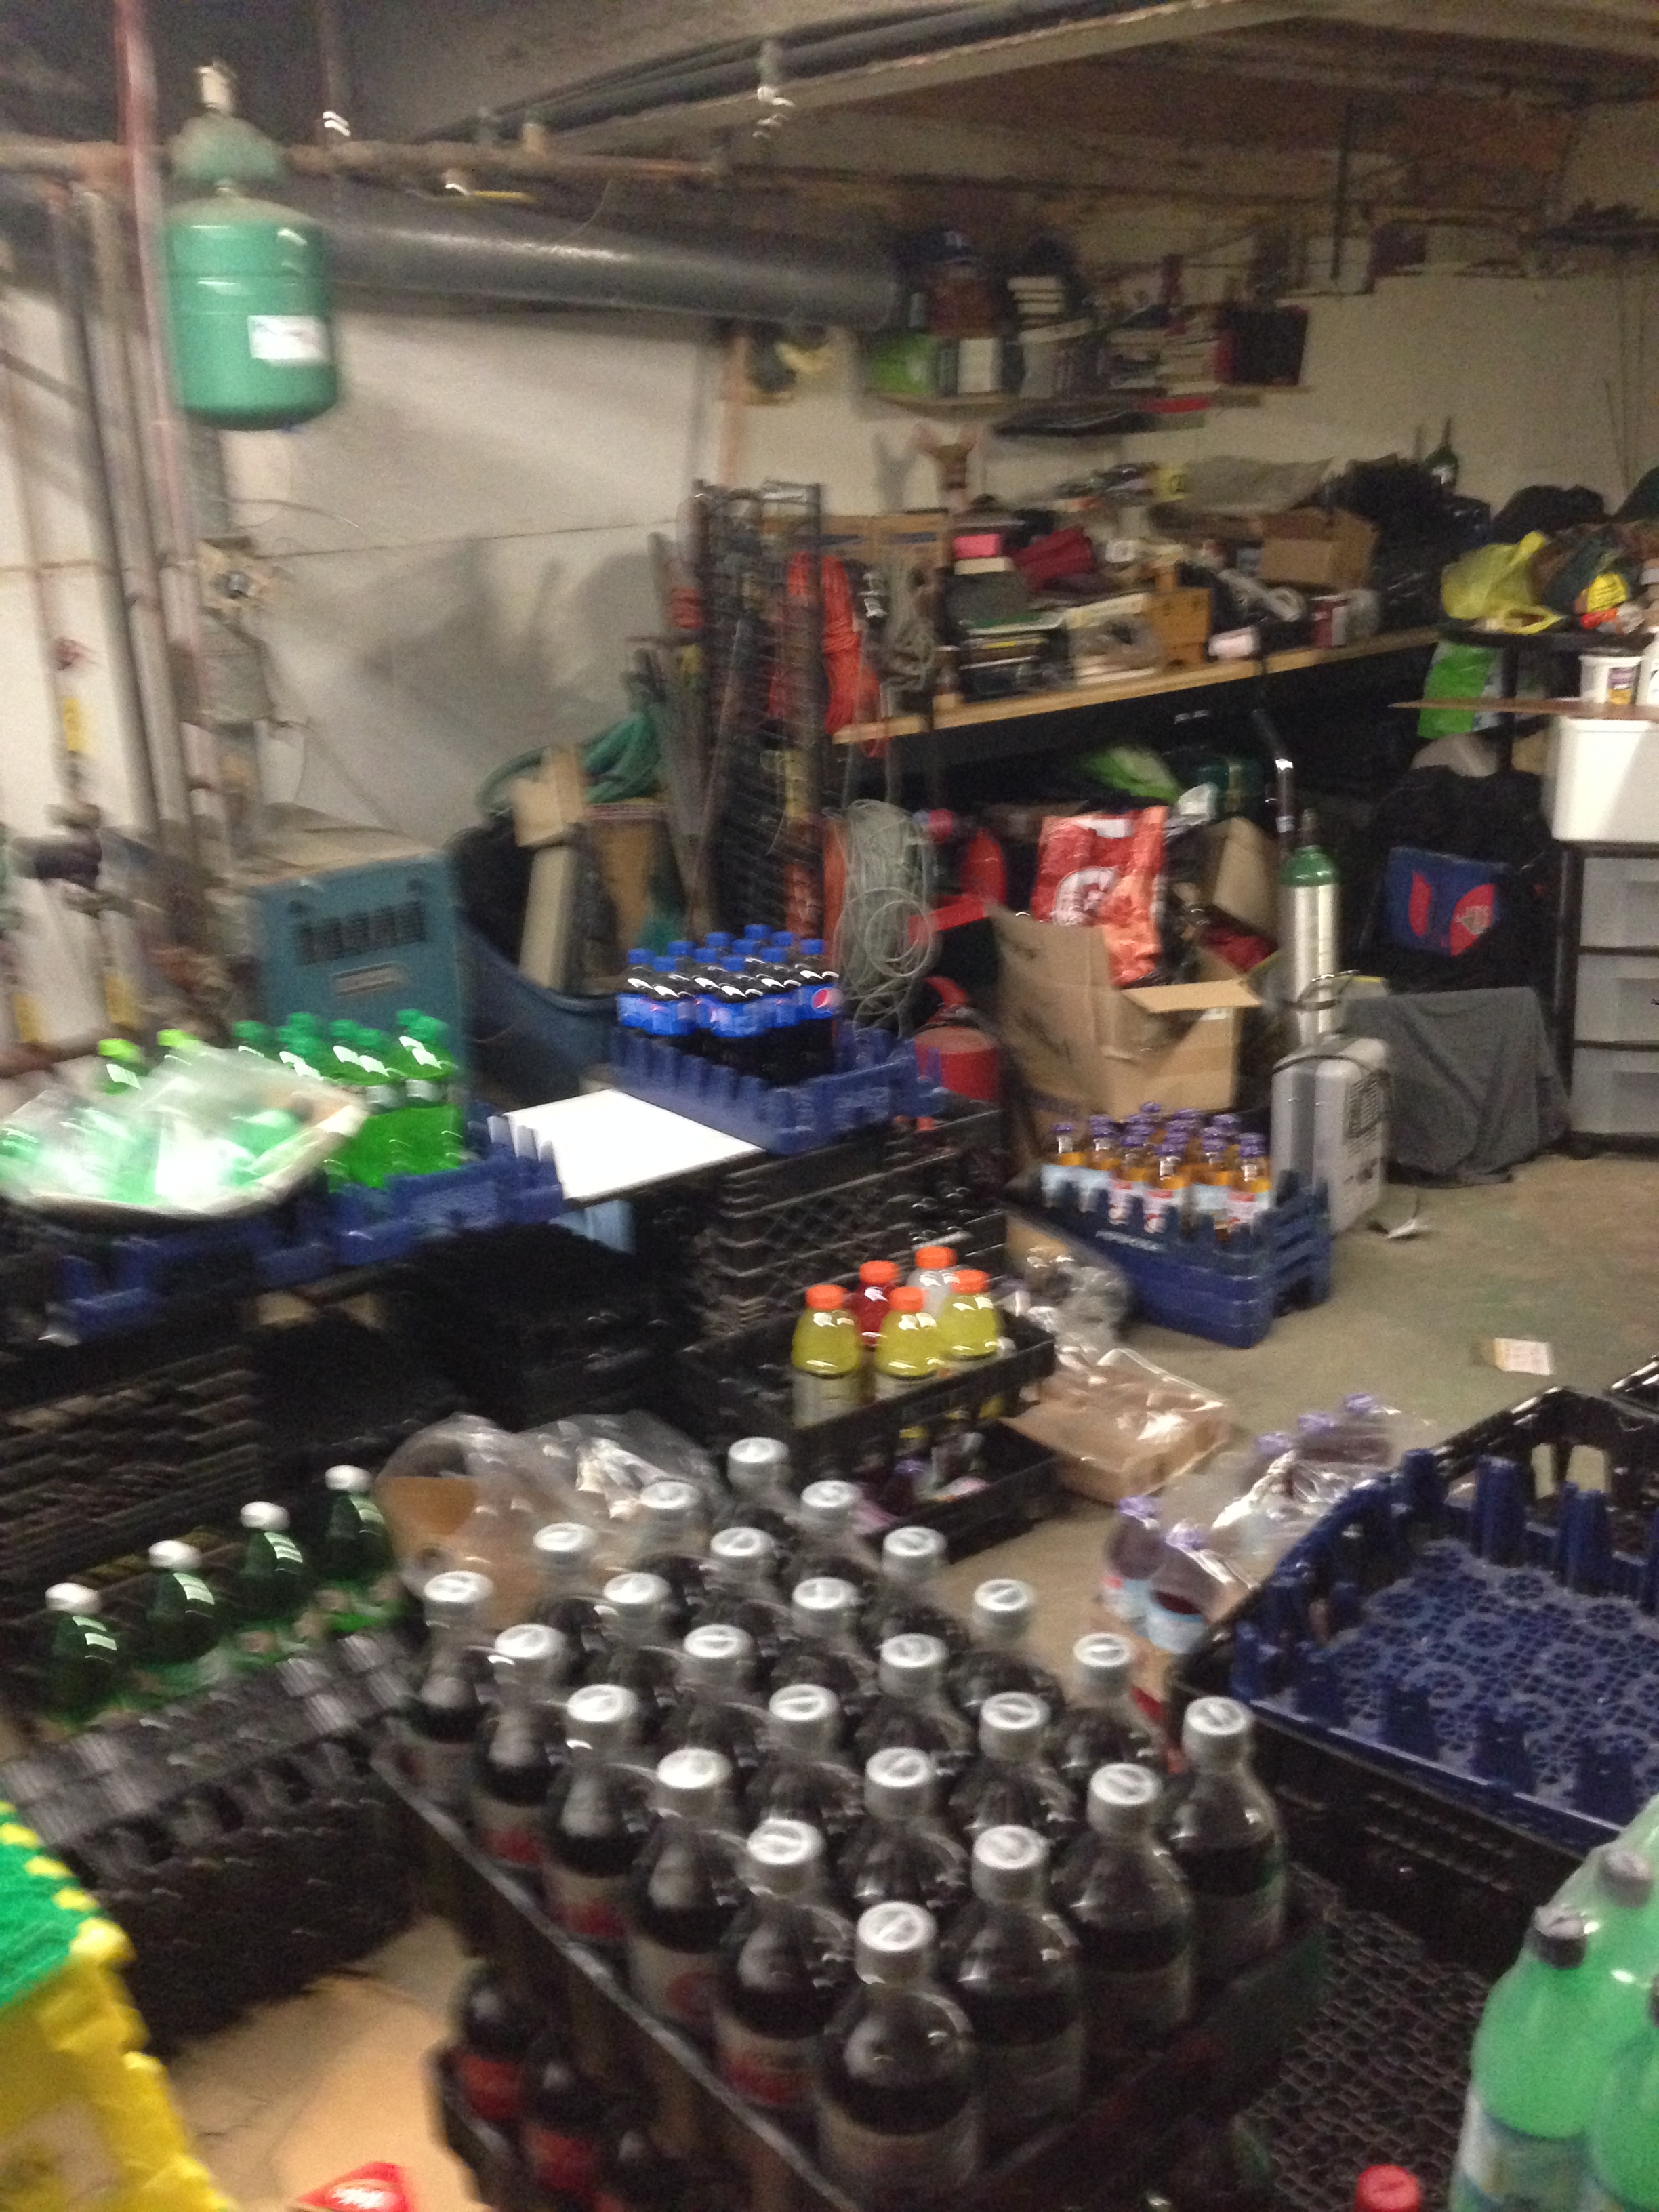 A look inside the Fish Oil lab in a Fenway basement. (Courtesy: Inspectional Services Dept.)